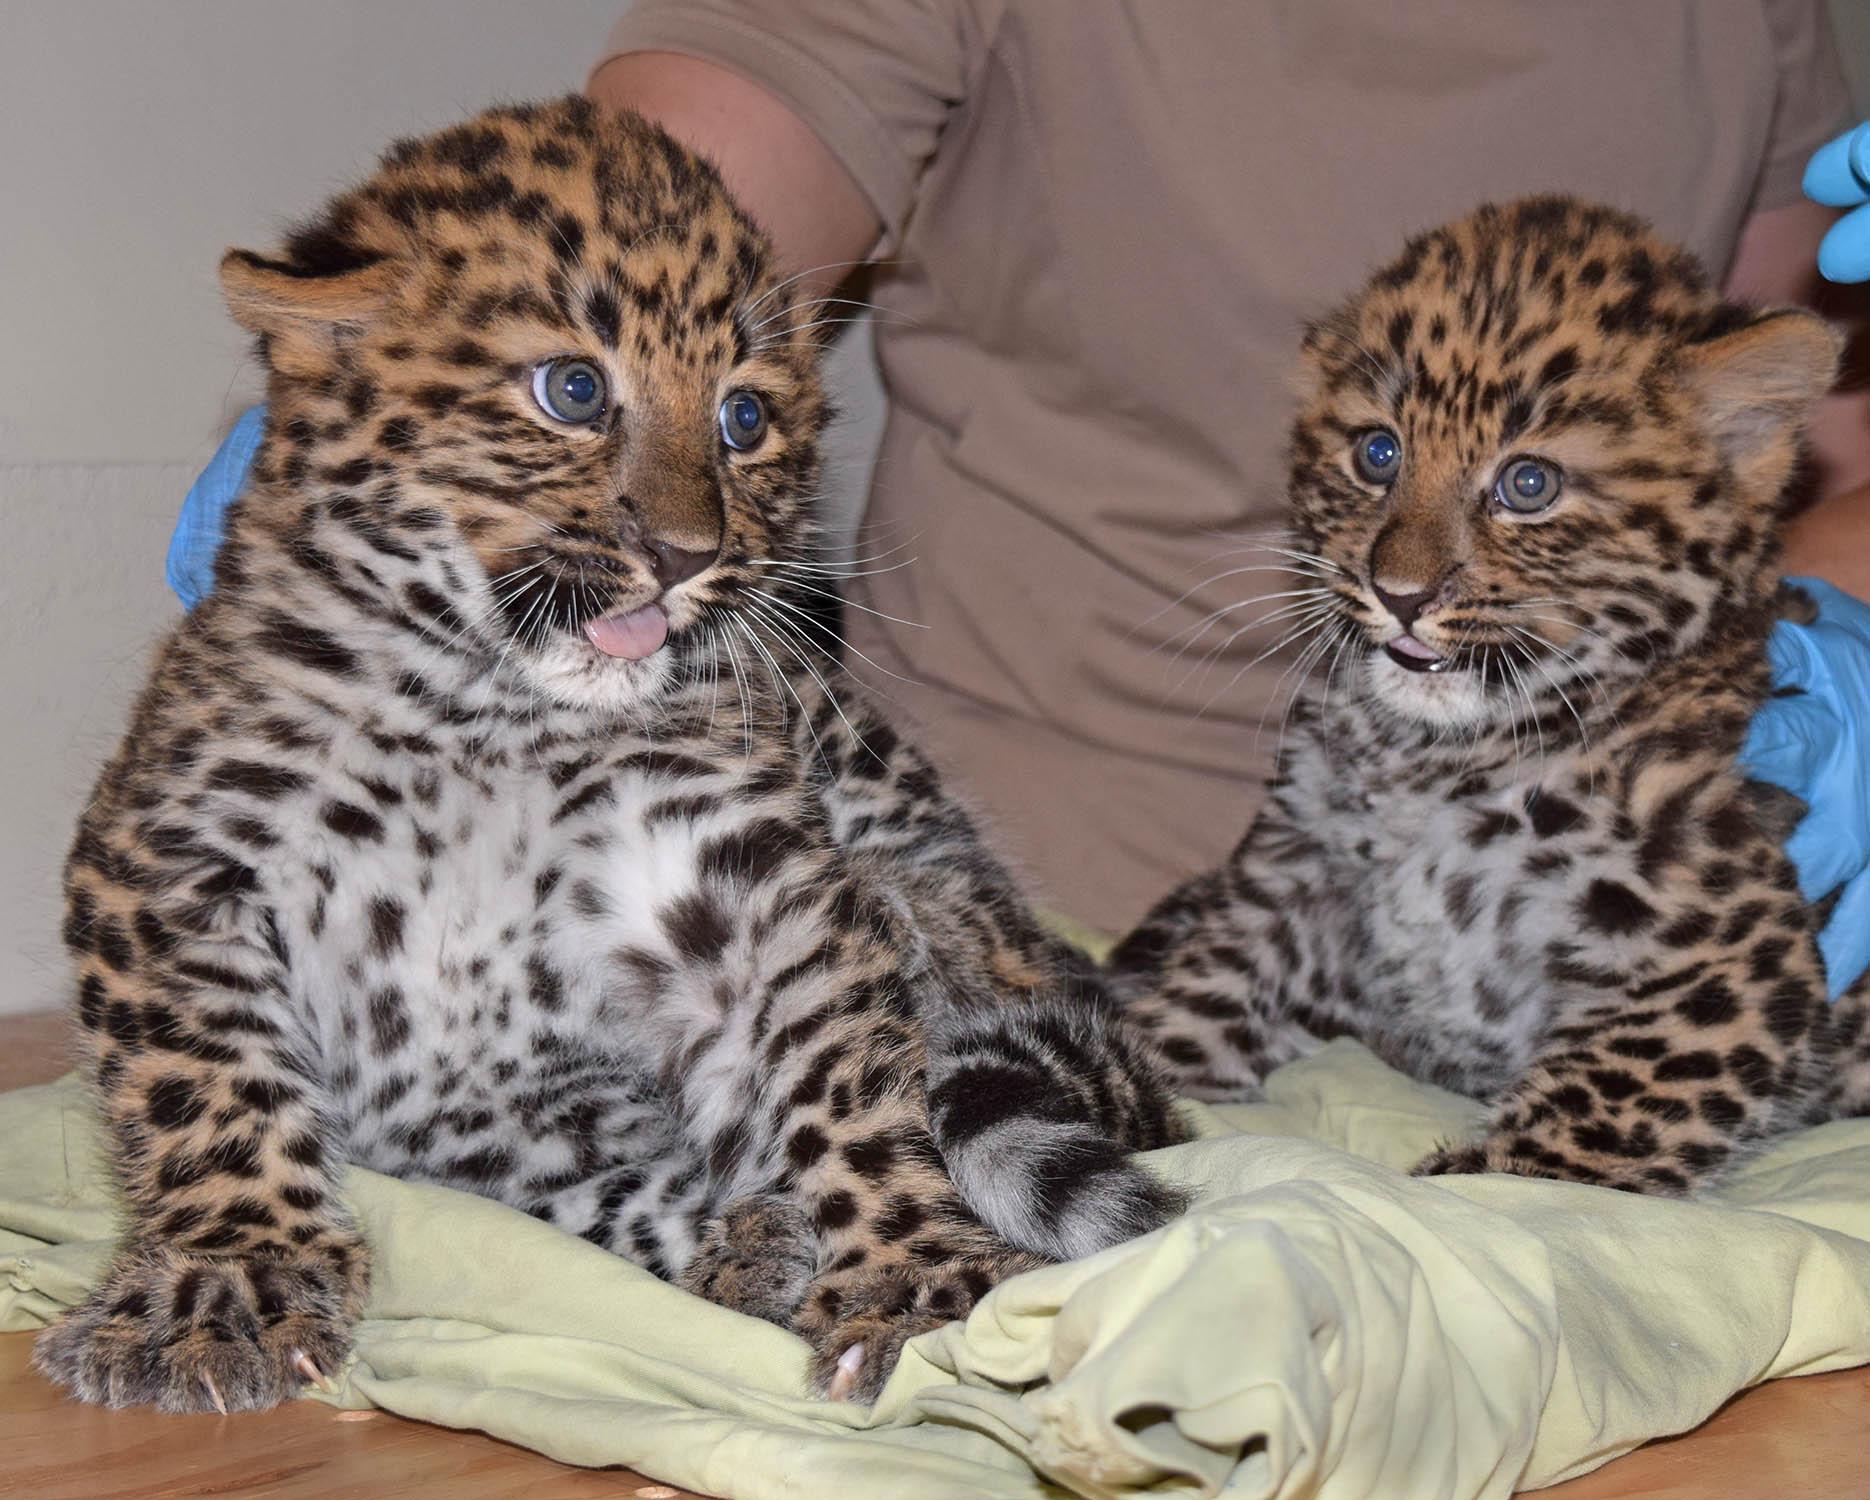 Two Amur lopeard cubs were born last year at Brookfield Zoo. (Cathy Bazzoni / Chicago Zoological Society)